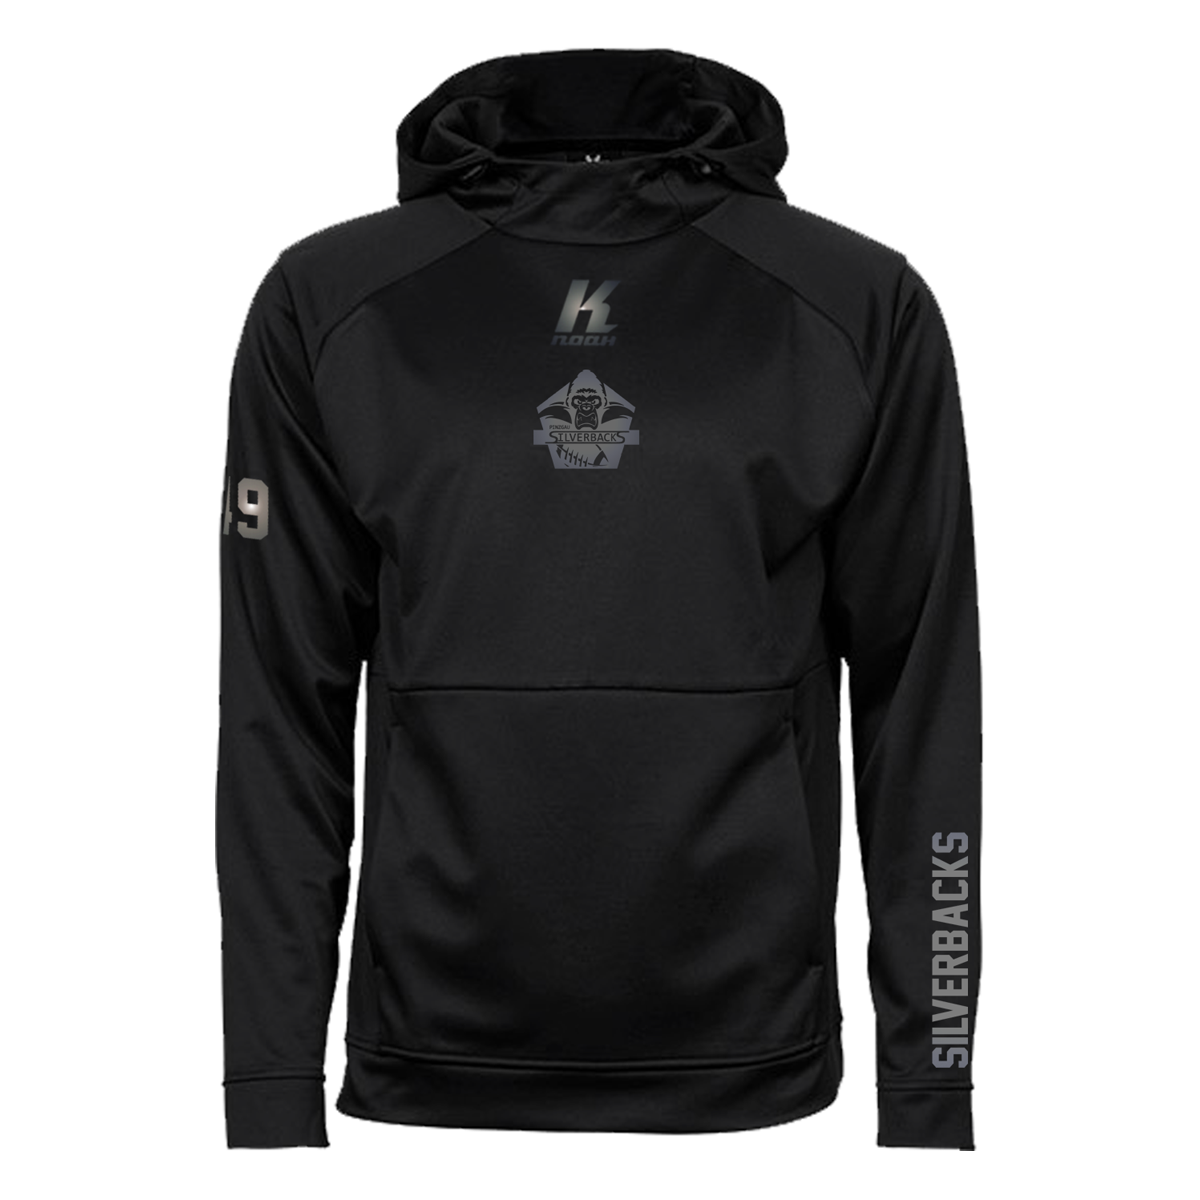 Silverbacks "Blackline" Performance Hoodie JH006 with Playernumber or Initials